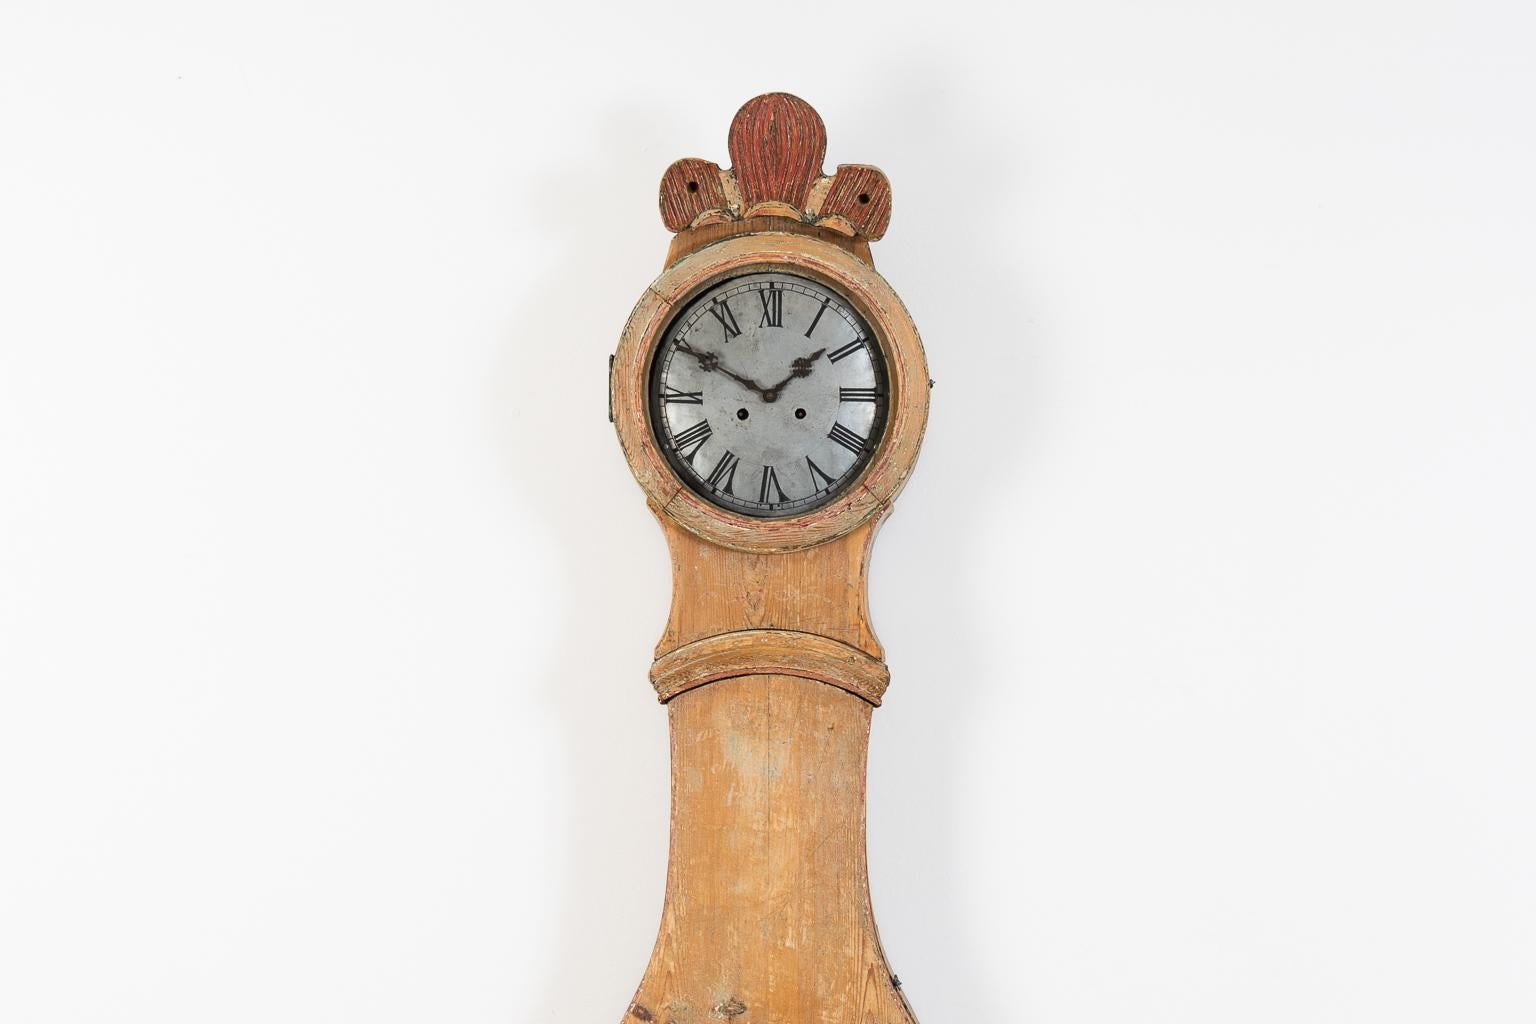 Mora clock manufactured in a curvaceous rococo shape. With a wooden carved headpiece in the shape of stylized seashells. The shells were the Swedish rococo style's trademark and it can be found on a number of different objects from the rococo